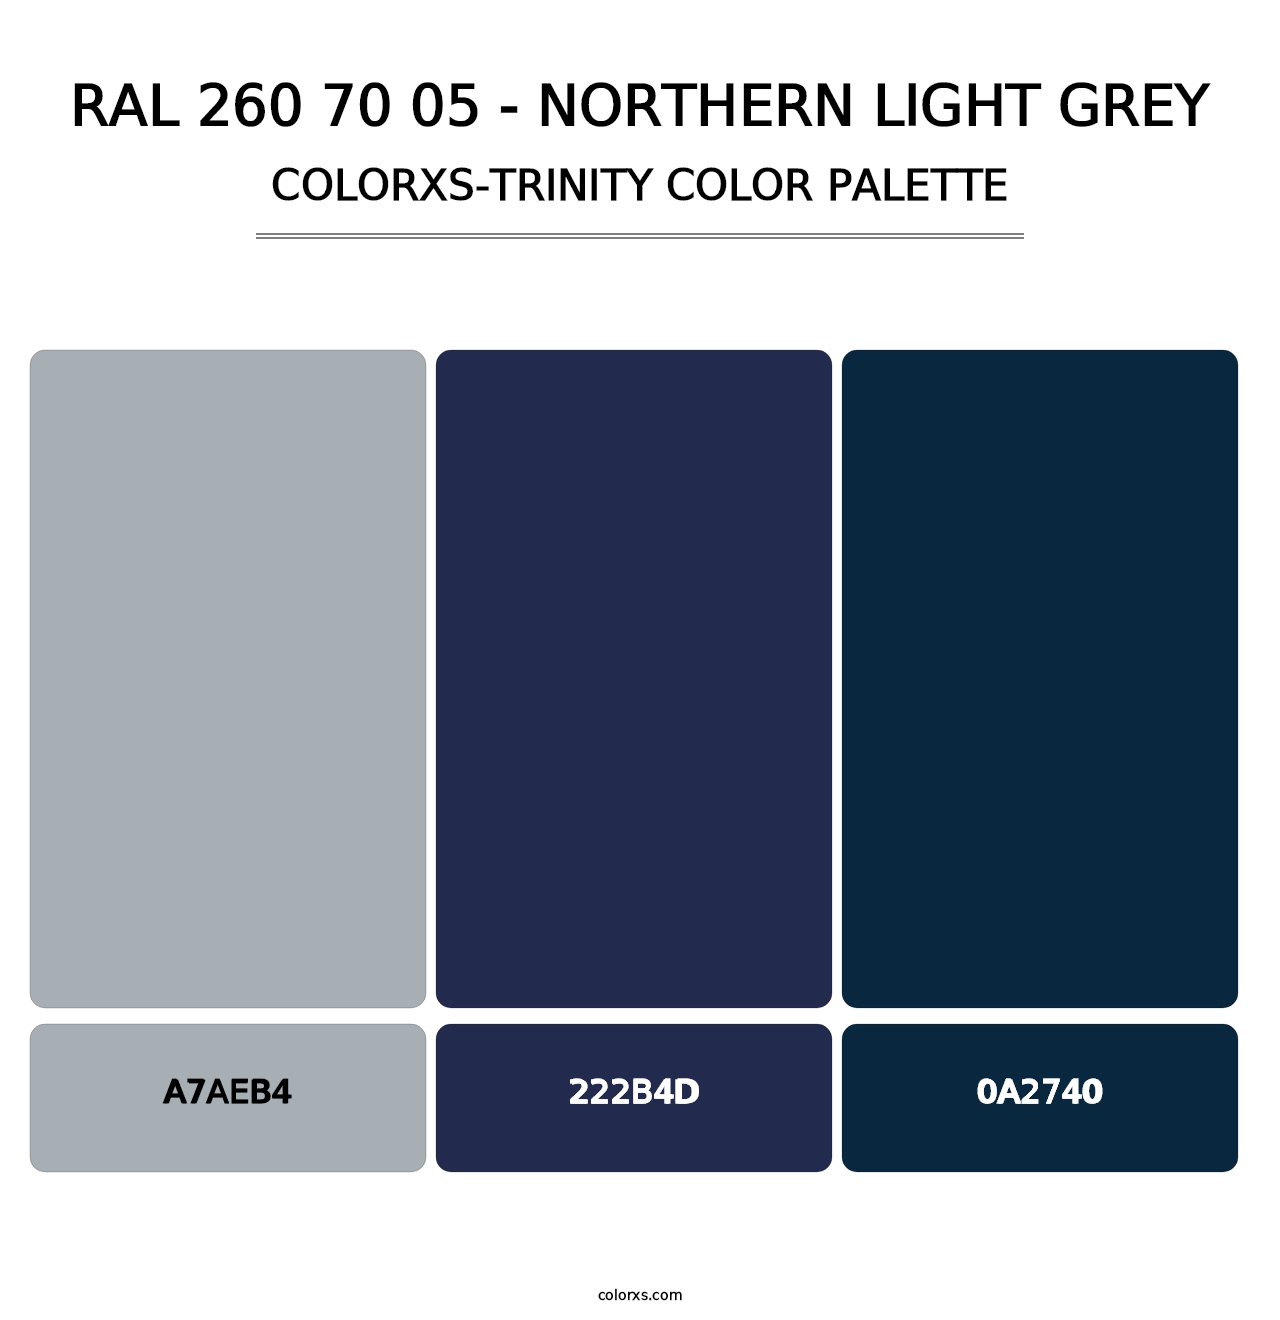 RAL 260 70 05 - Northern Light Grey - Colorxs Trinity Palette